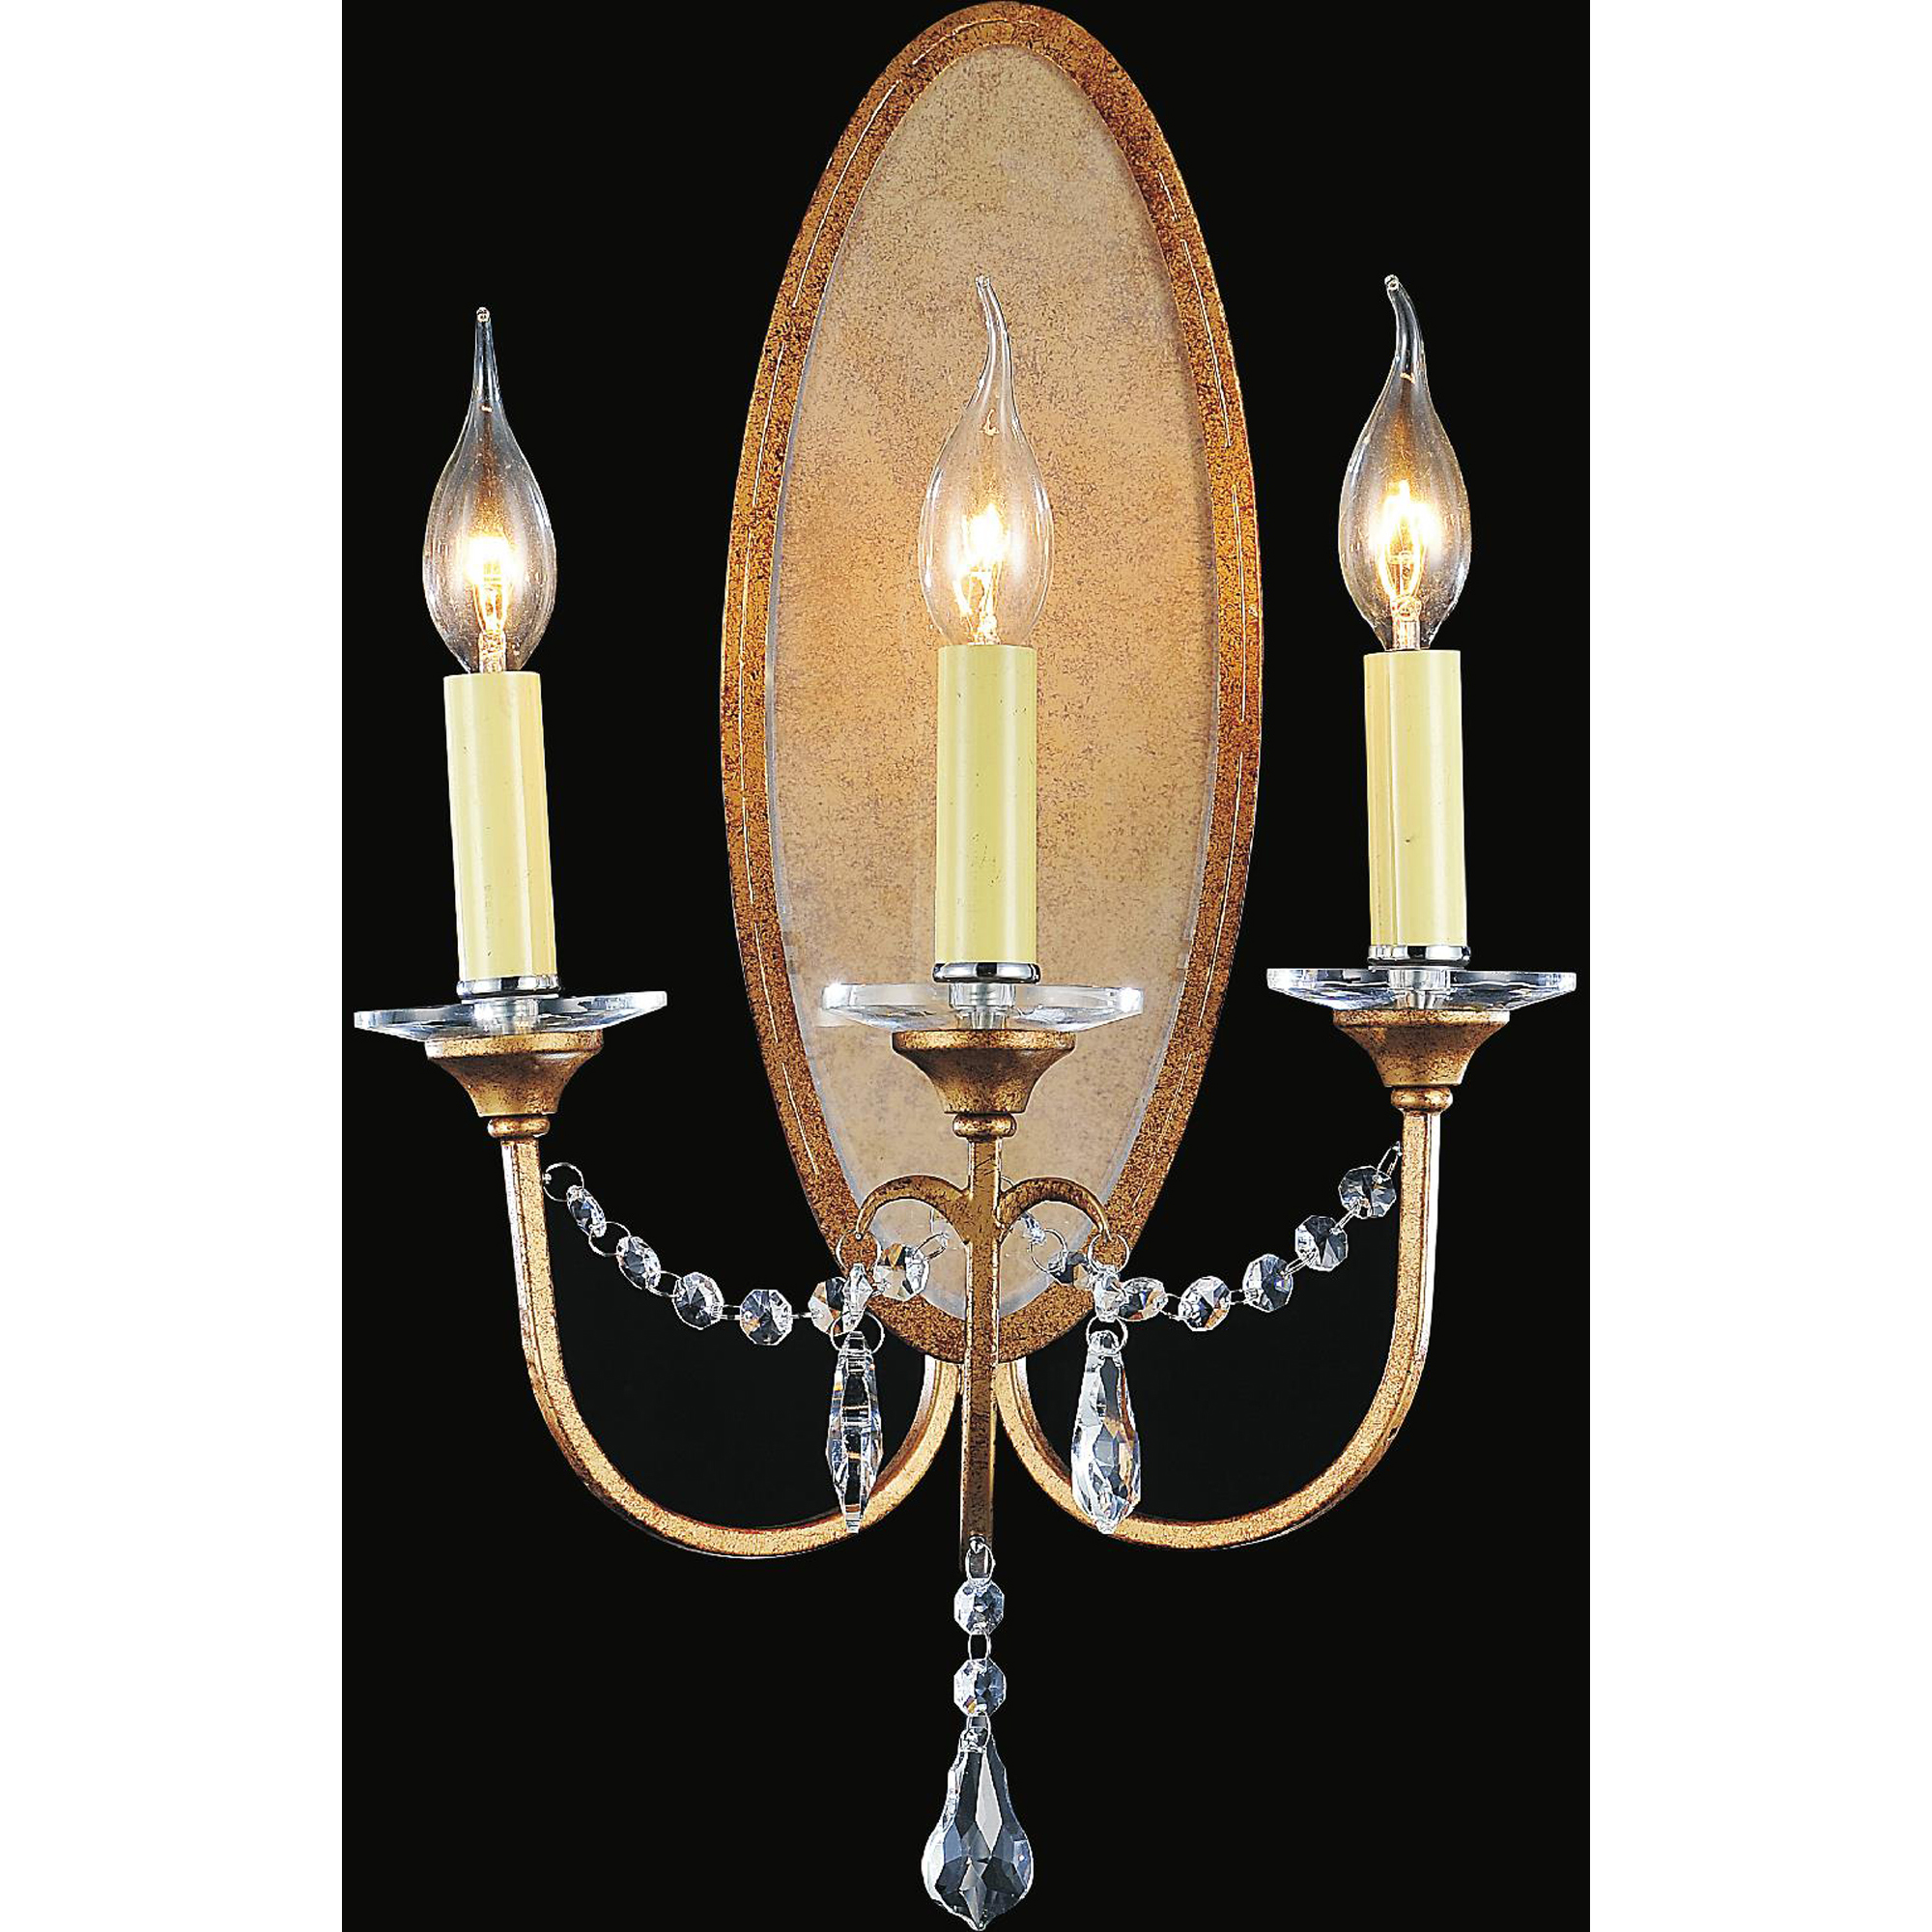 Electra 3 Light Wall Sconce With Oxidized Bronze Finish